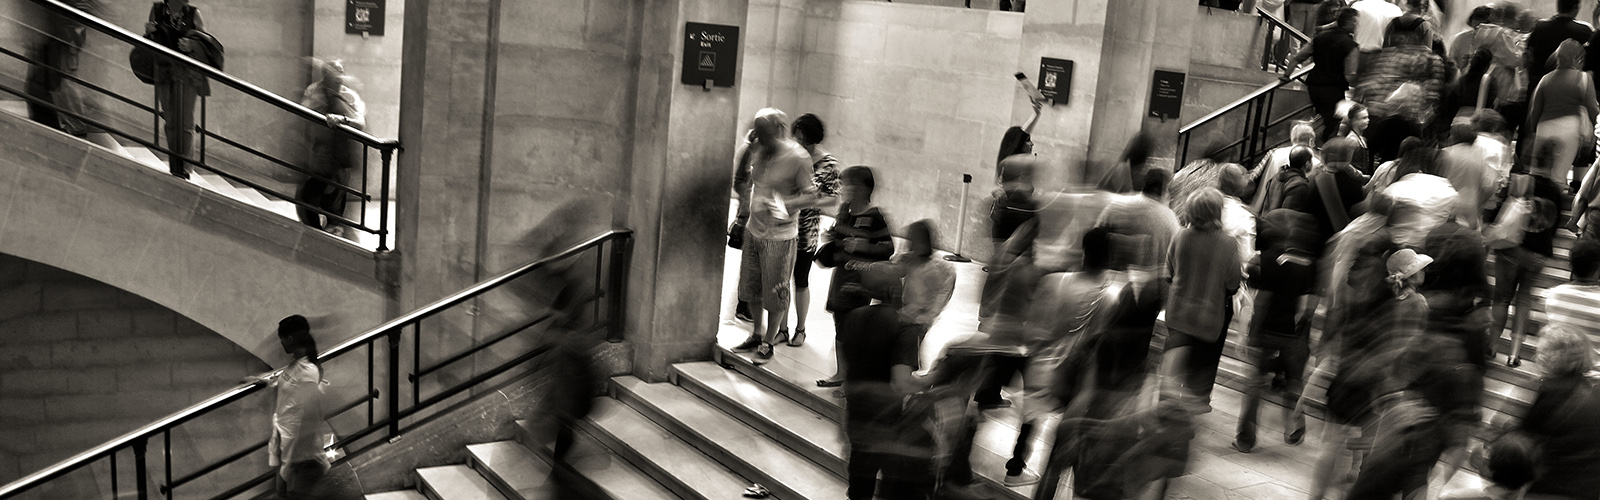 Edited in dark sepia/black and white this is a photo taken with adjusted shutter speed. It shows people and crowds moving throughout a station, people's movement is blurred.